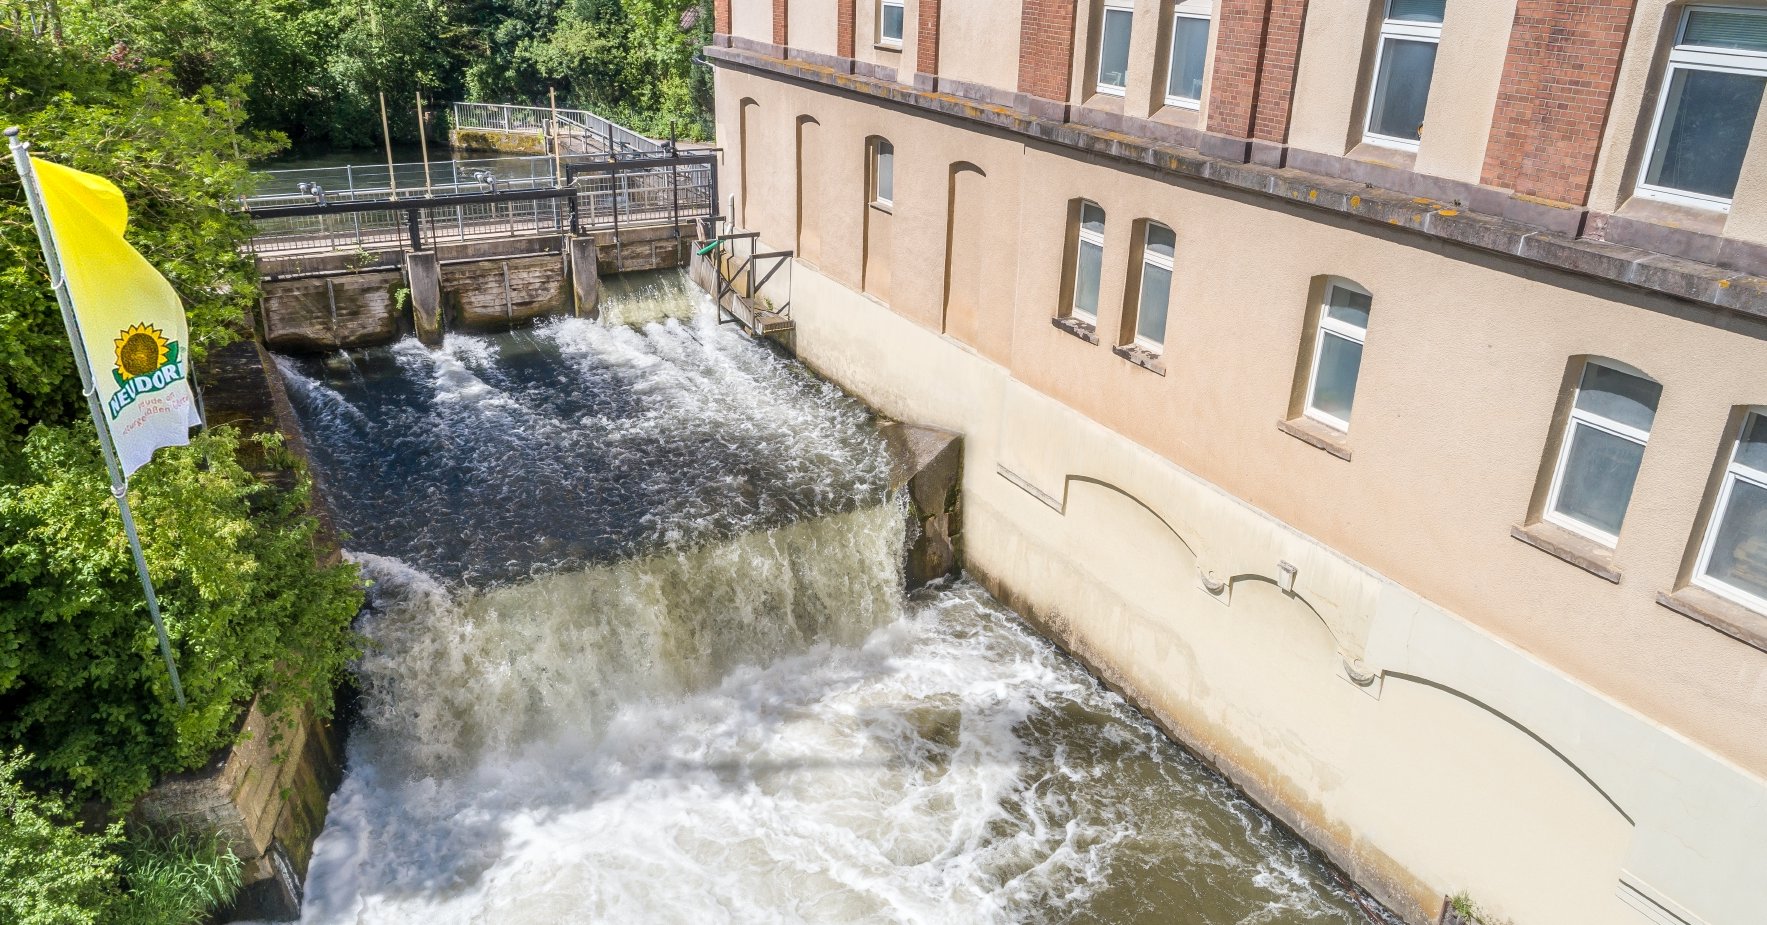 We produce a certain amount of our energy ourselves in an environmentally friendly way using the hydroelectric power of the Emmer river